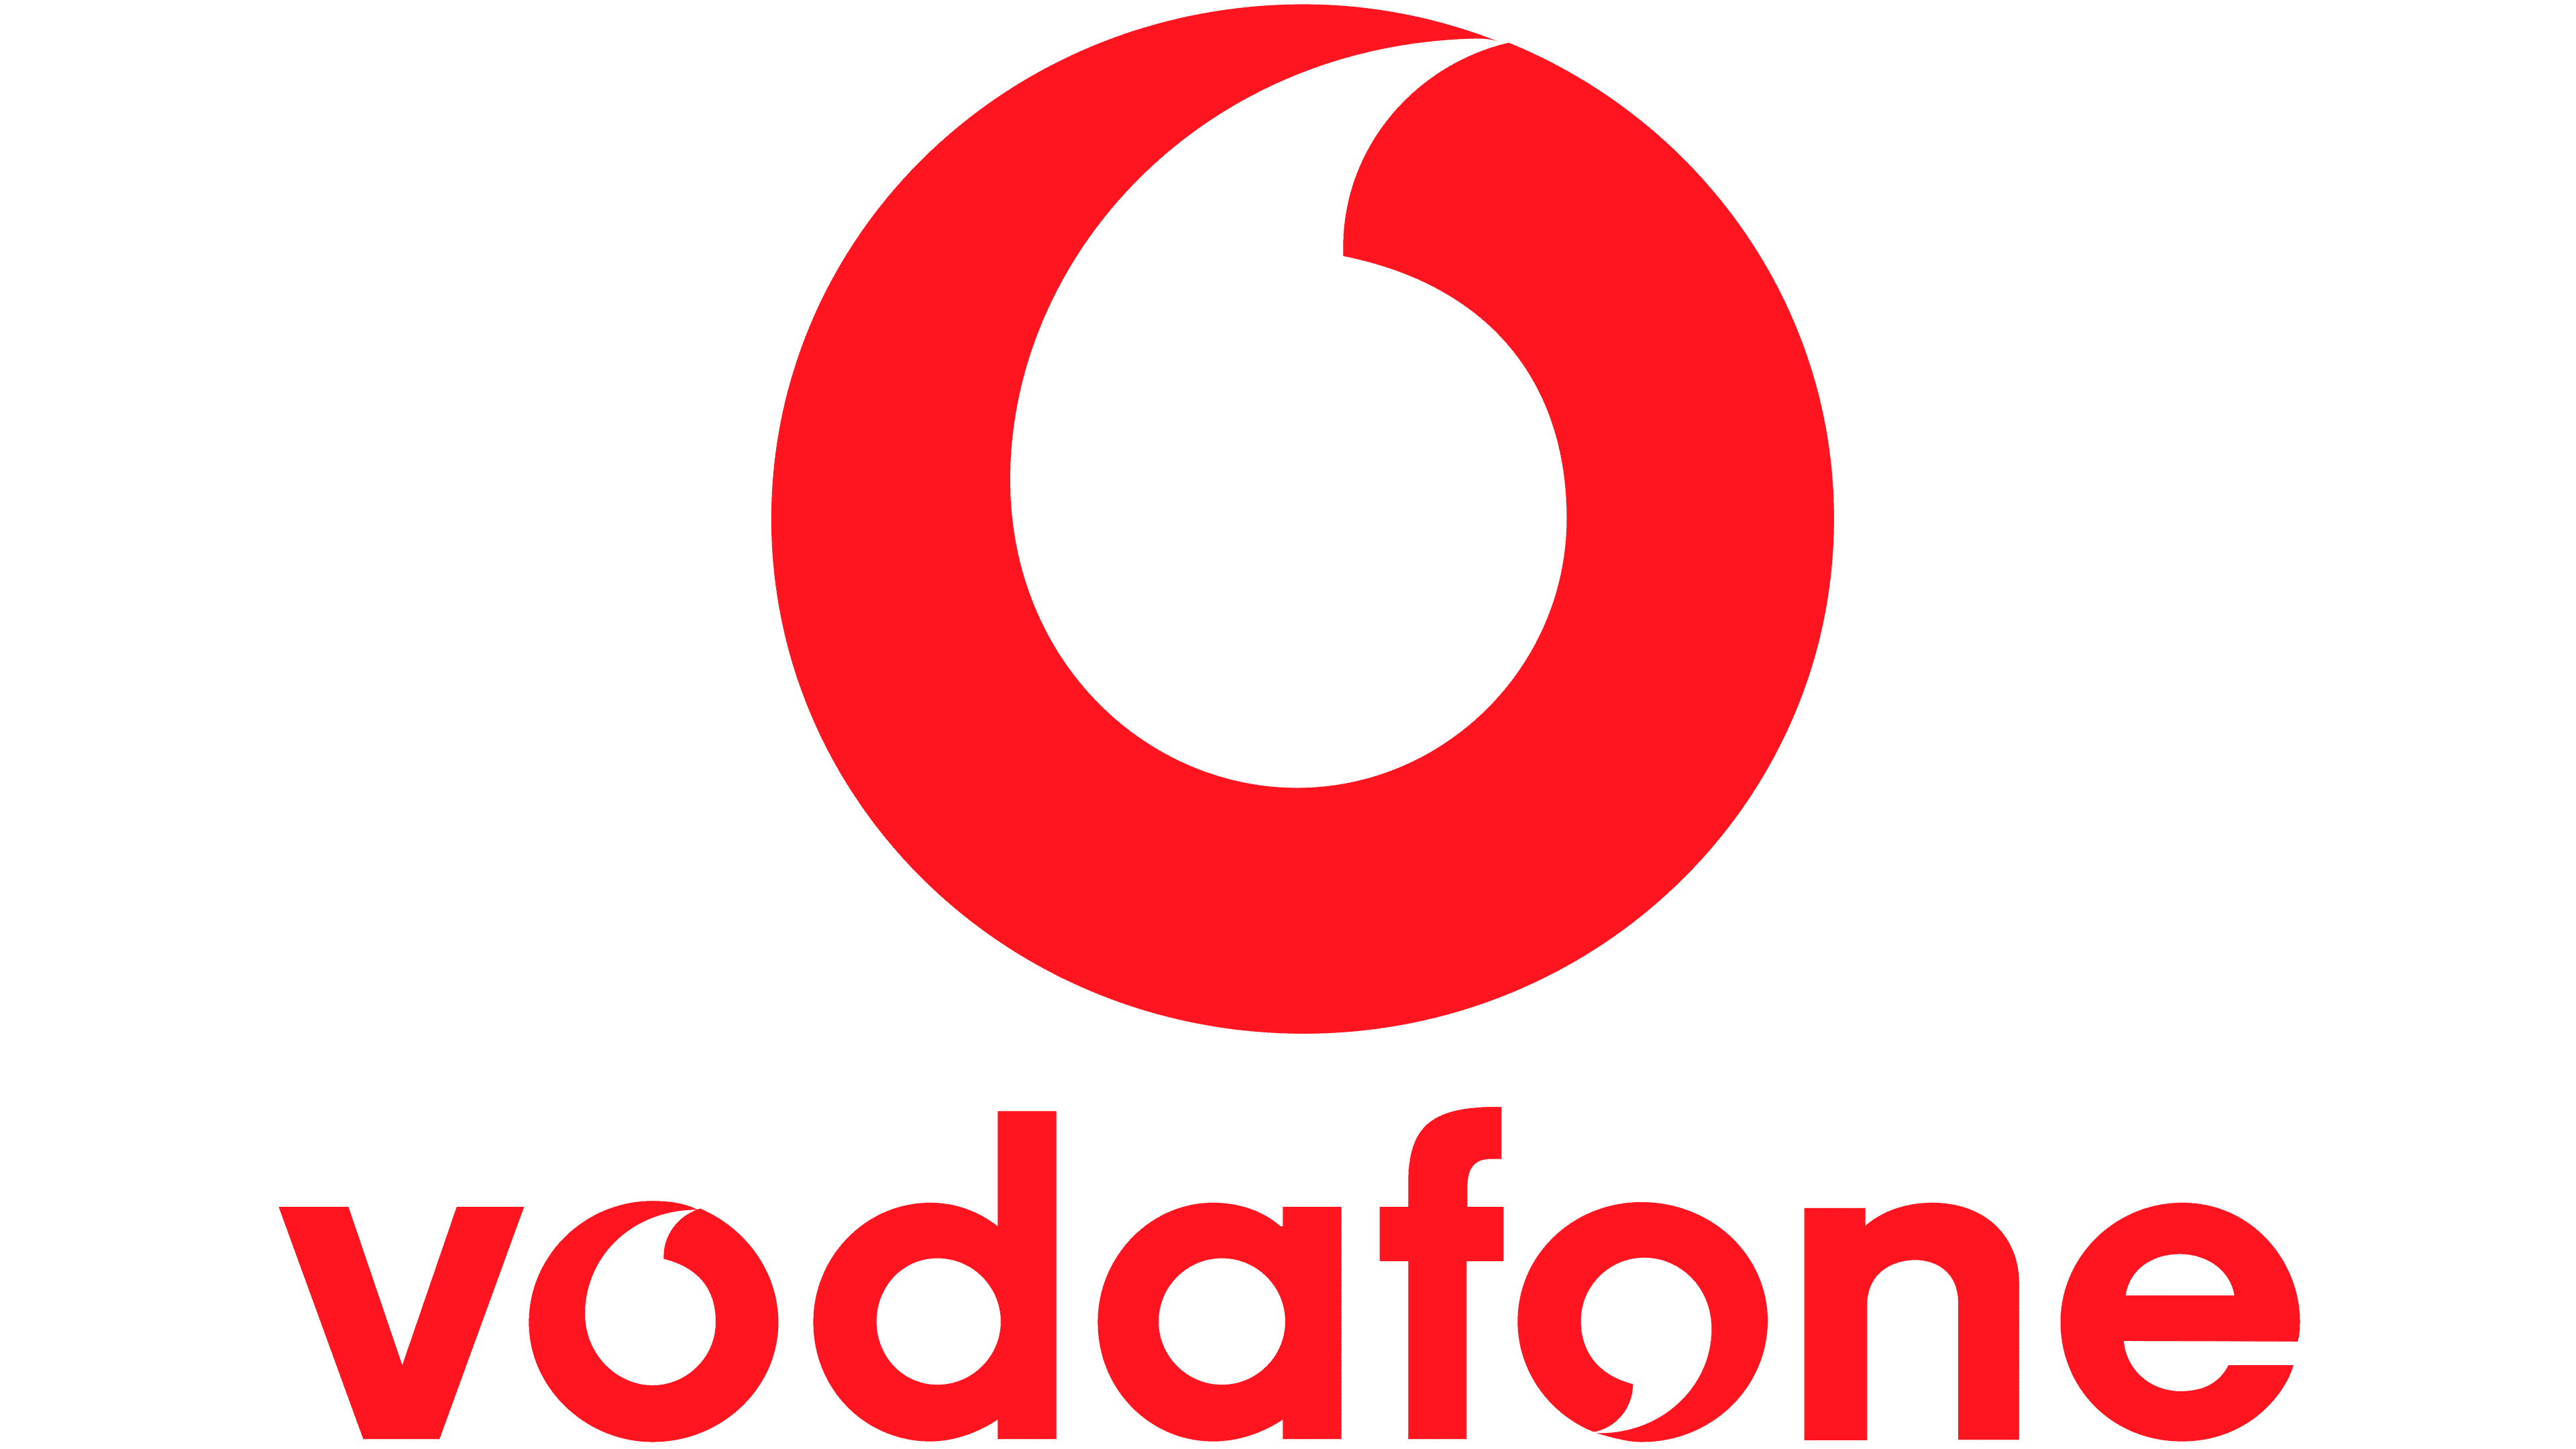 Vodafone Logo, PNG, Symbol, History, Meaning